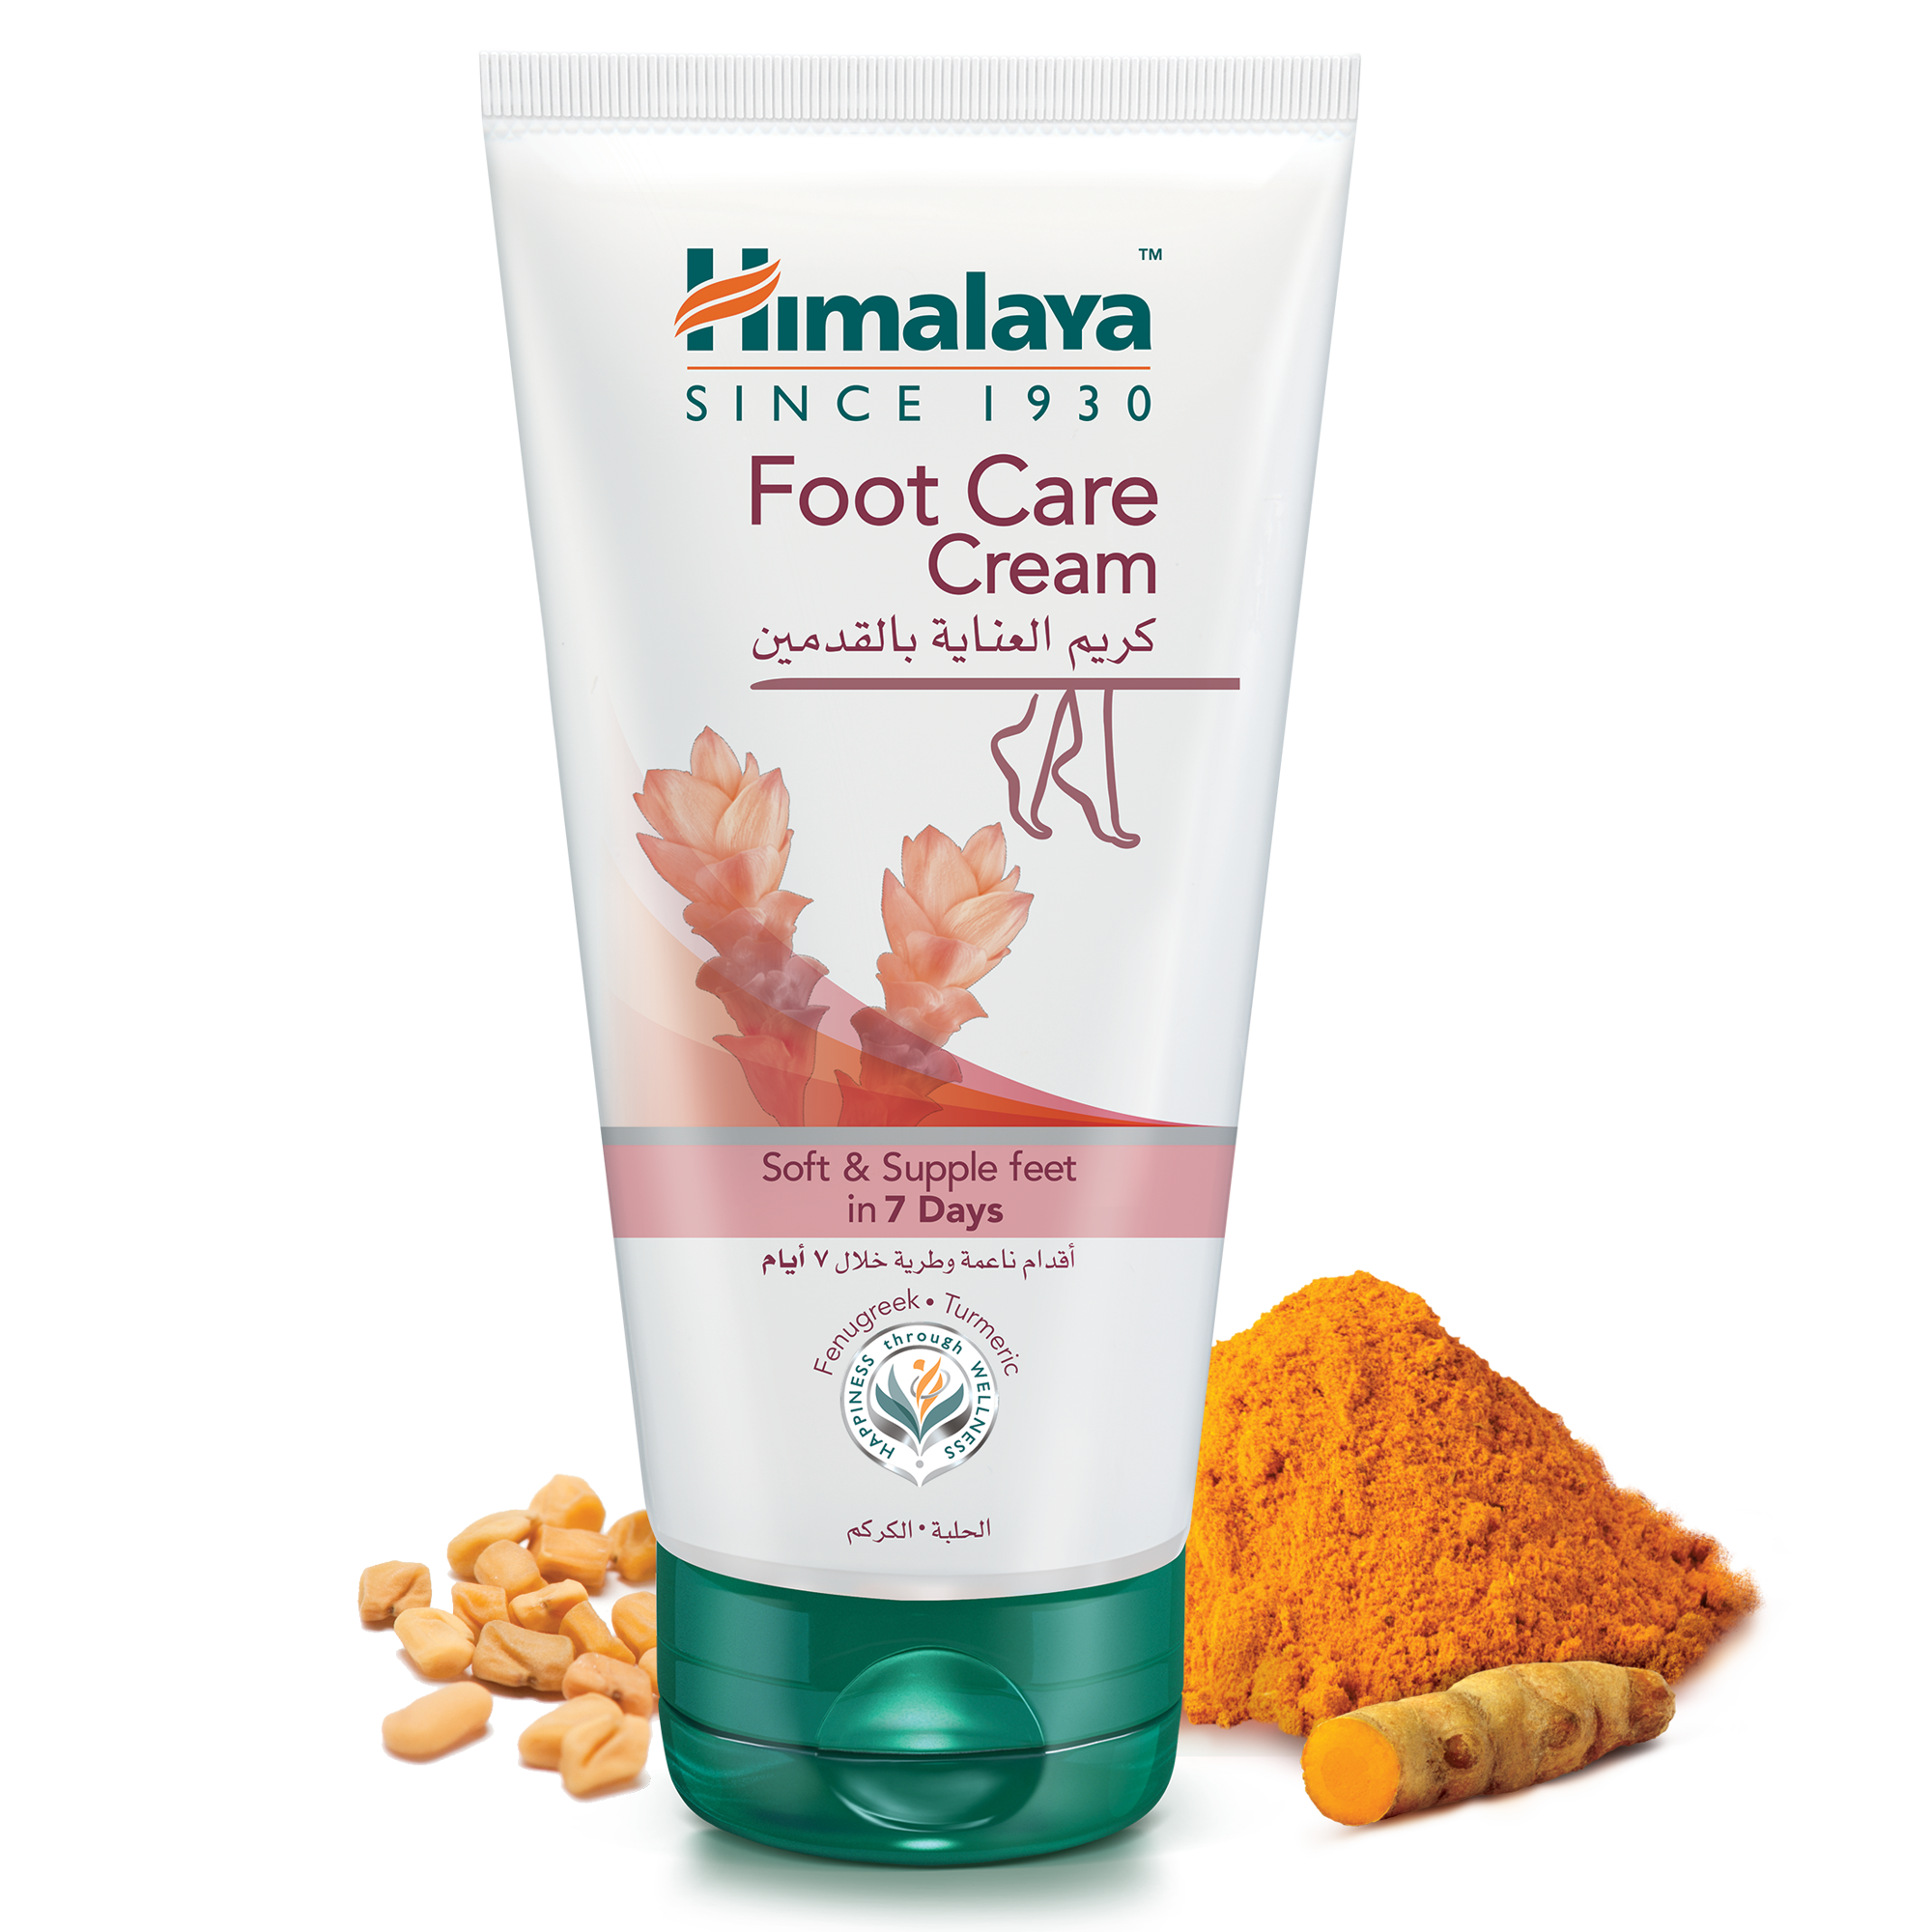 Himalaya Foot Care Cream 125g -  For Dry, Cracked heels & Rough feet